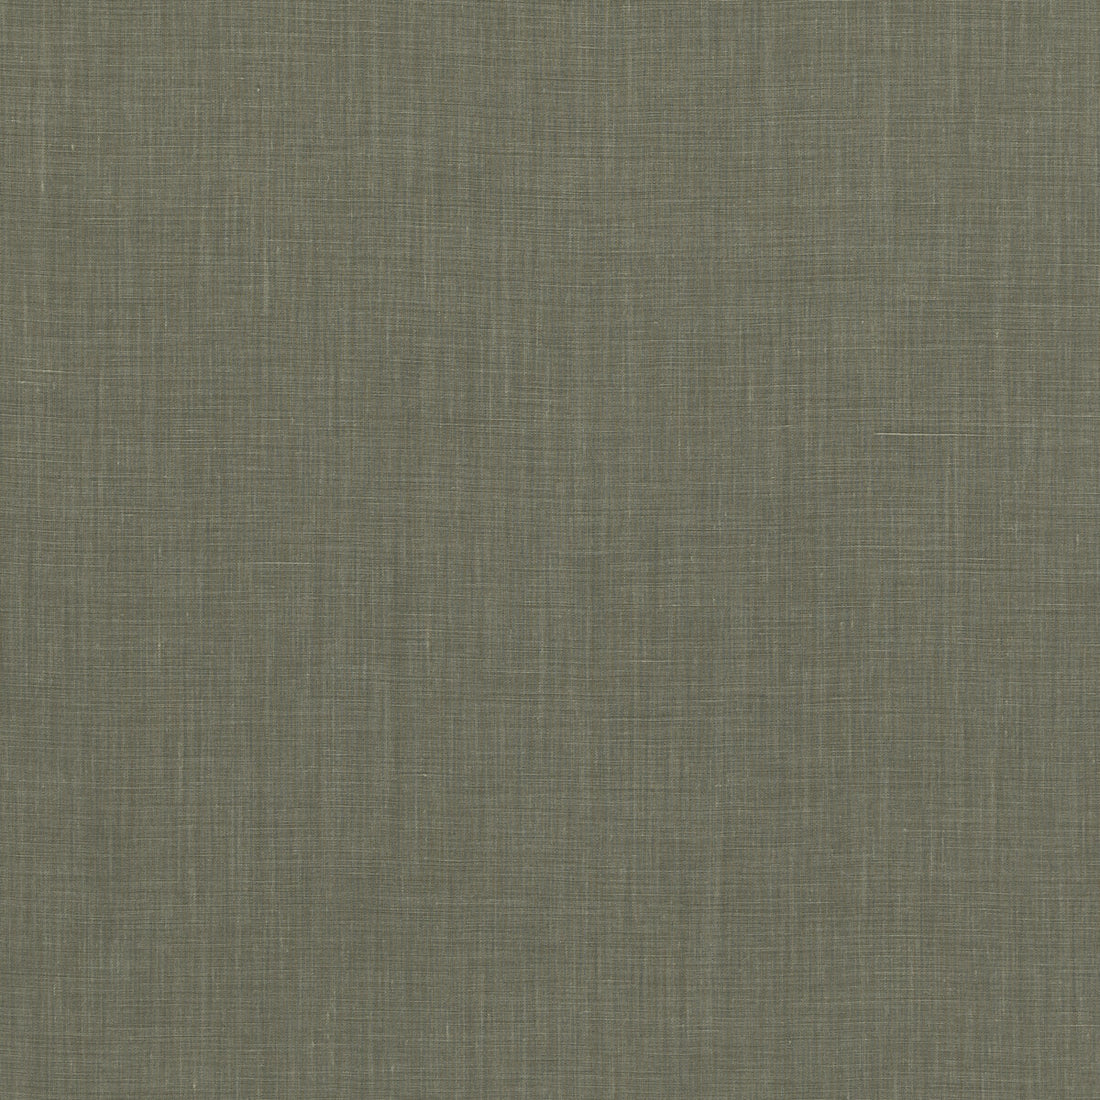 Baker House Linen fabric in sage color - pattern BF10961.790.0 - by G P &amp; J Baker in the Baker House Linens collection